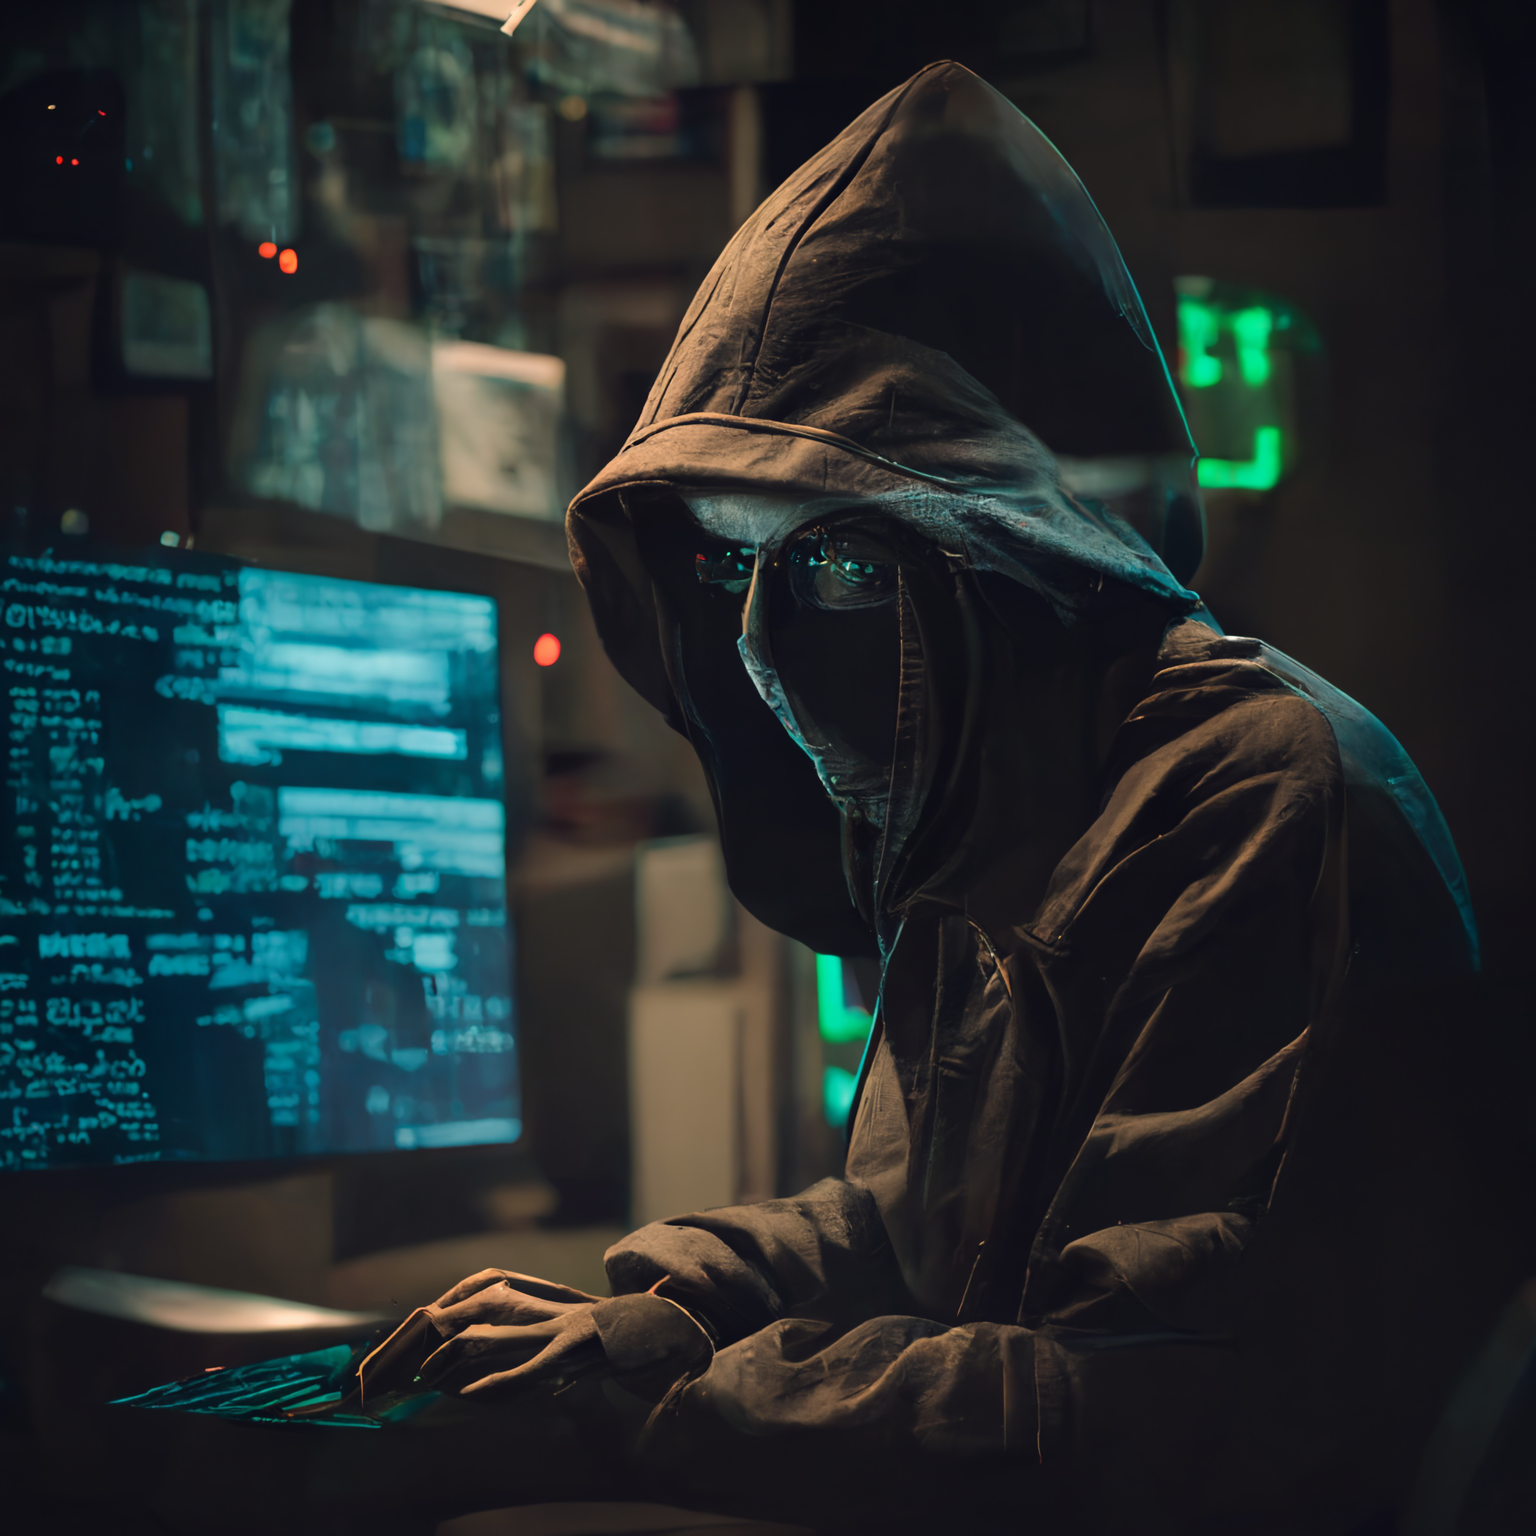 Red_bird_male_hacker_in_front_of_the_computer_761d3974-dc55-46e4-b514-472786729175.png